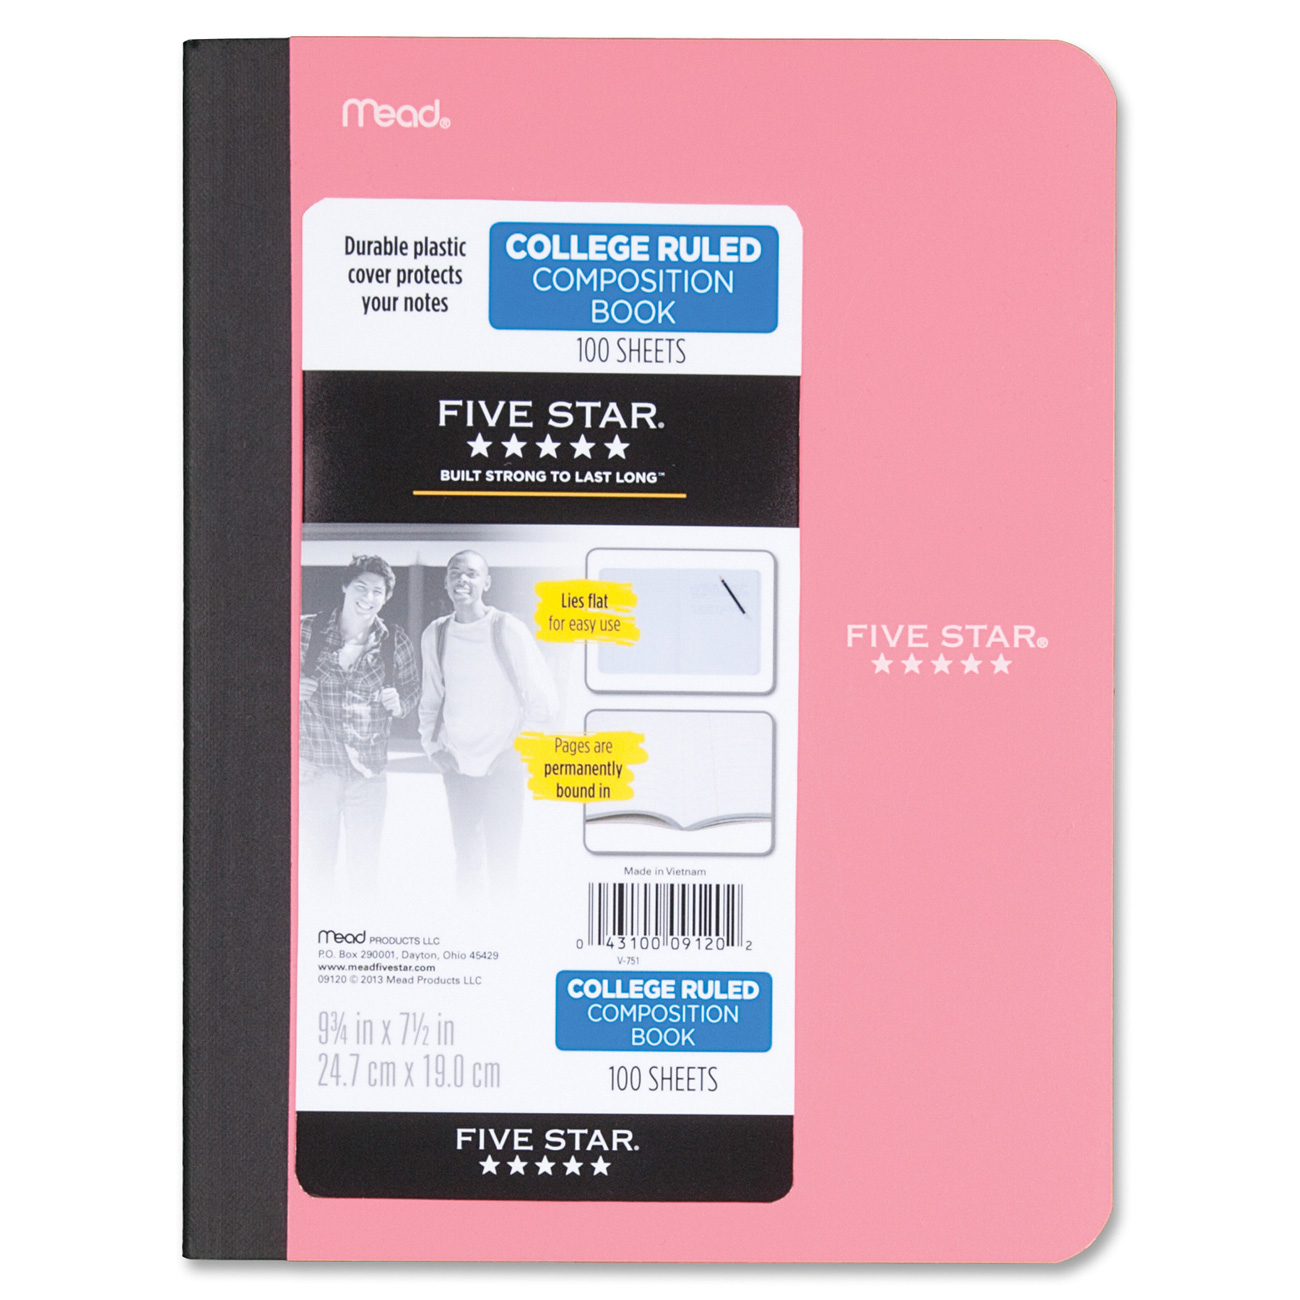 Five Star Composition Book, College Ruled, 100 Sheets, Assorted Colors (09343) - (1 - Count) - image 5 of 10